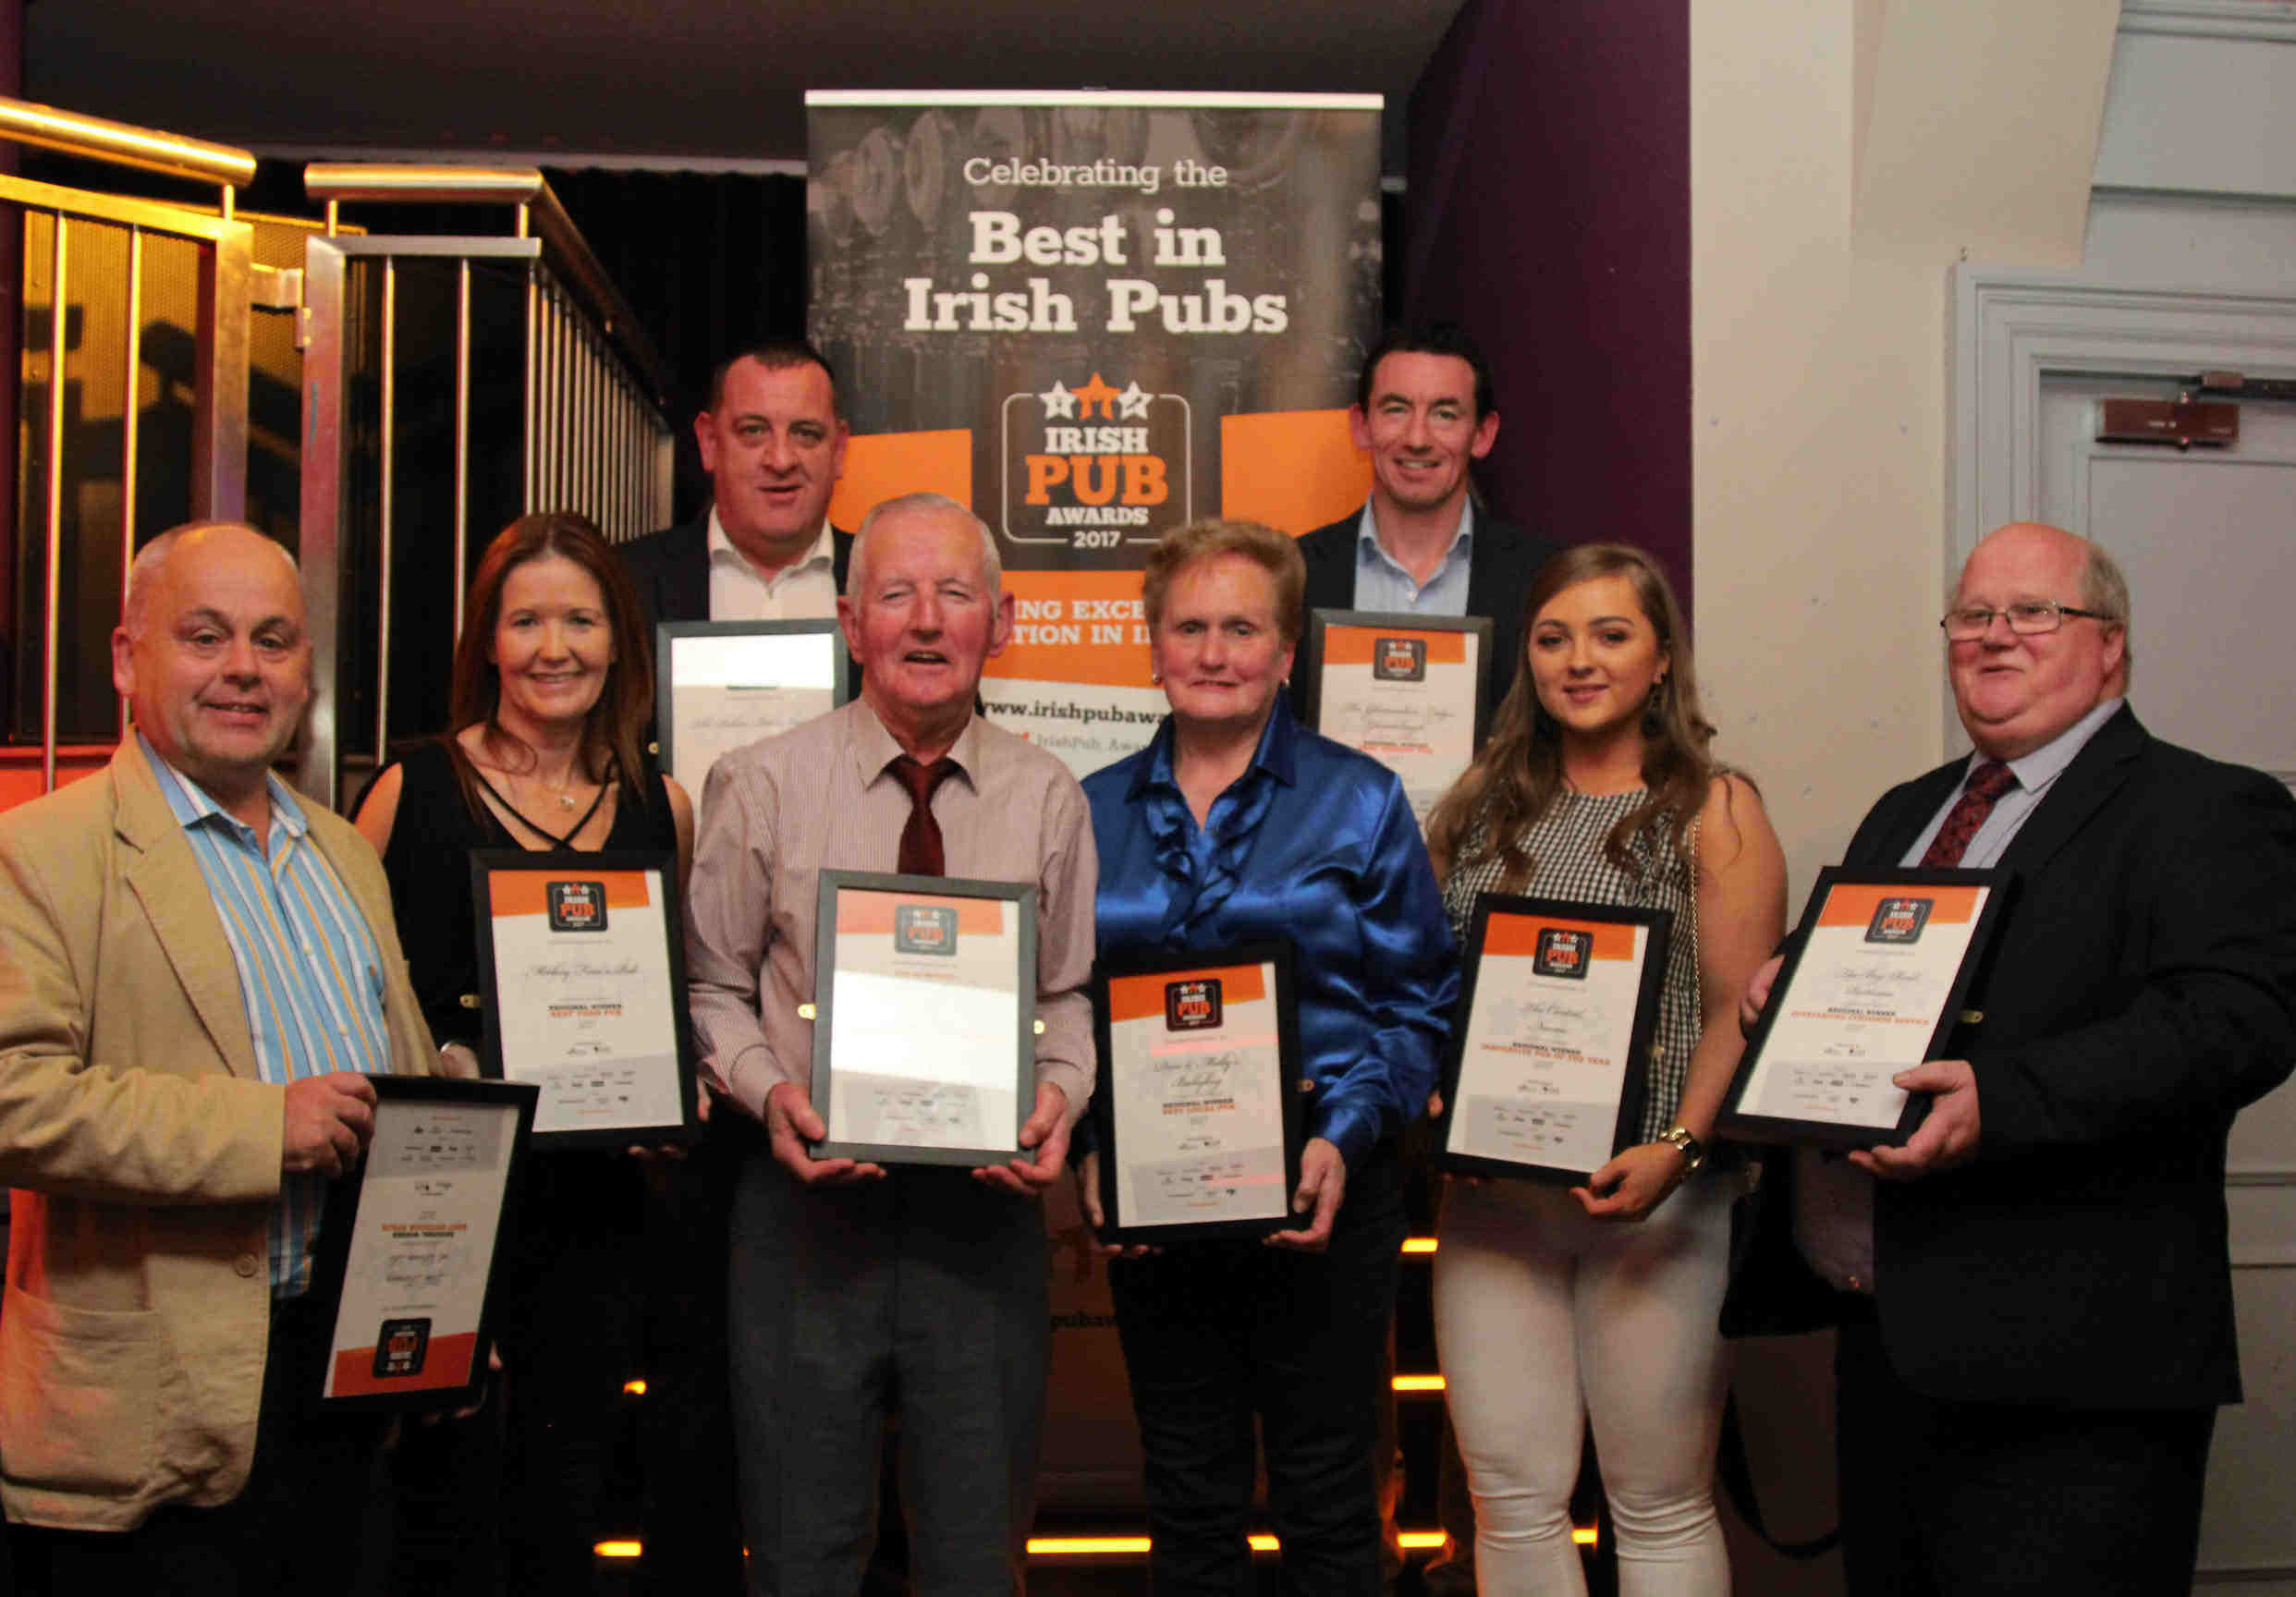 Eastern Award-winners (front Row, from left): Eugene McGovern, The Terrace at Dinn Rí; Leigh Williams, Mickey Finn’s; Tom Joe Bradley, Clancy’s Bar; Molly Boland, Dan & Molly’s; Aisling Moore, The Central Bar and the VFI’s Paddy Brereton representing The Bog Road.